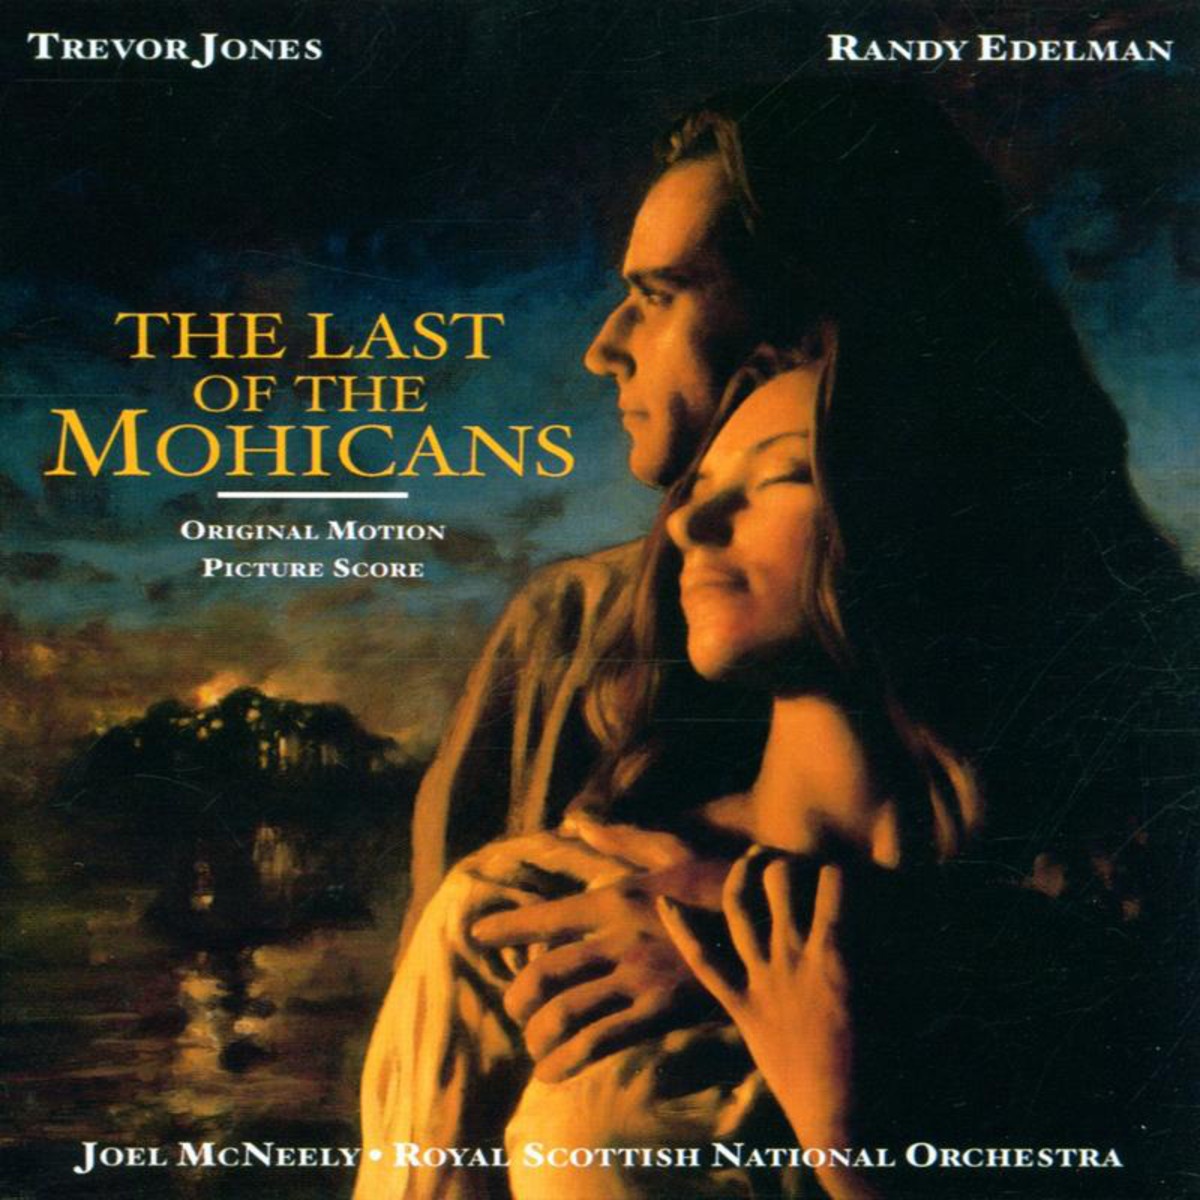 The Last Of The Mohicans (Original Motion Picture Score)